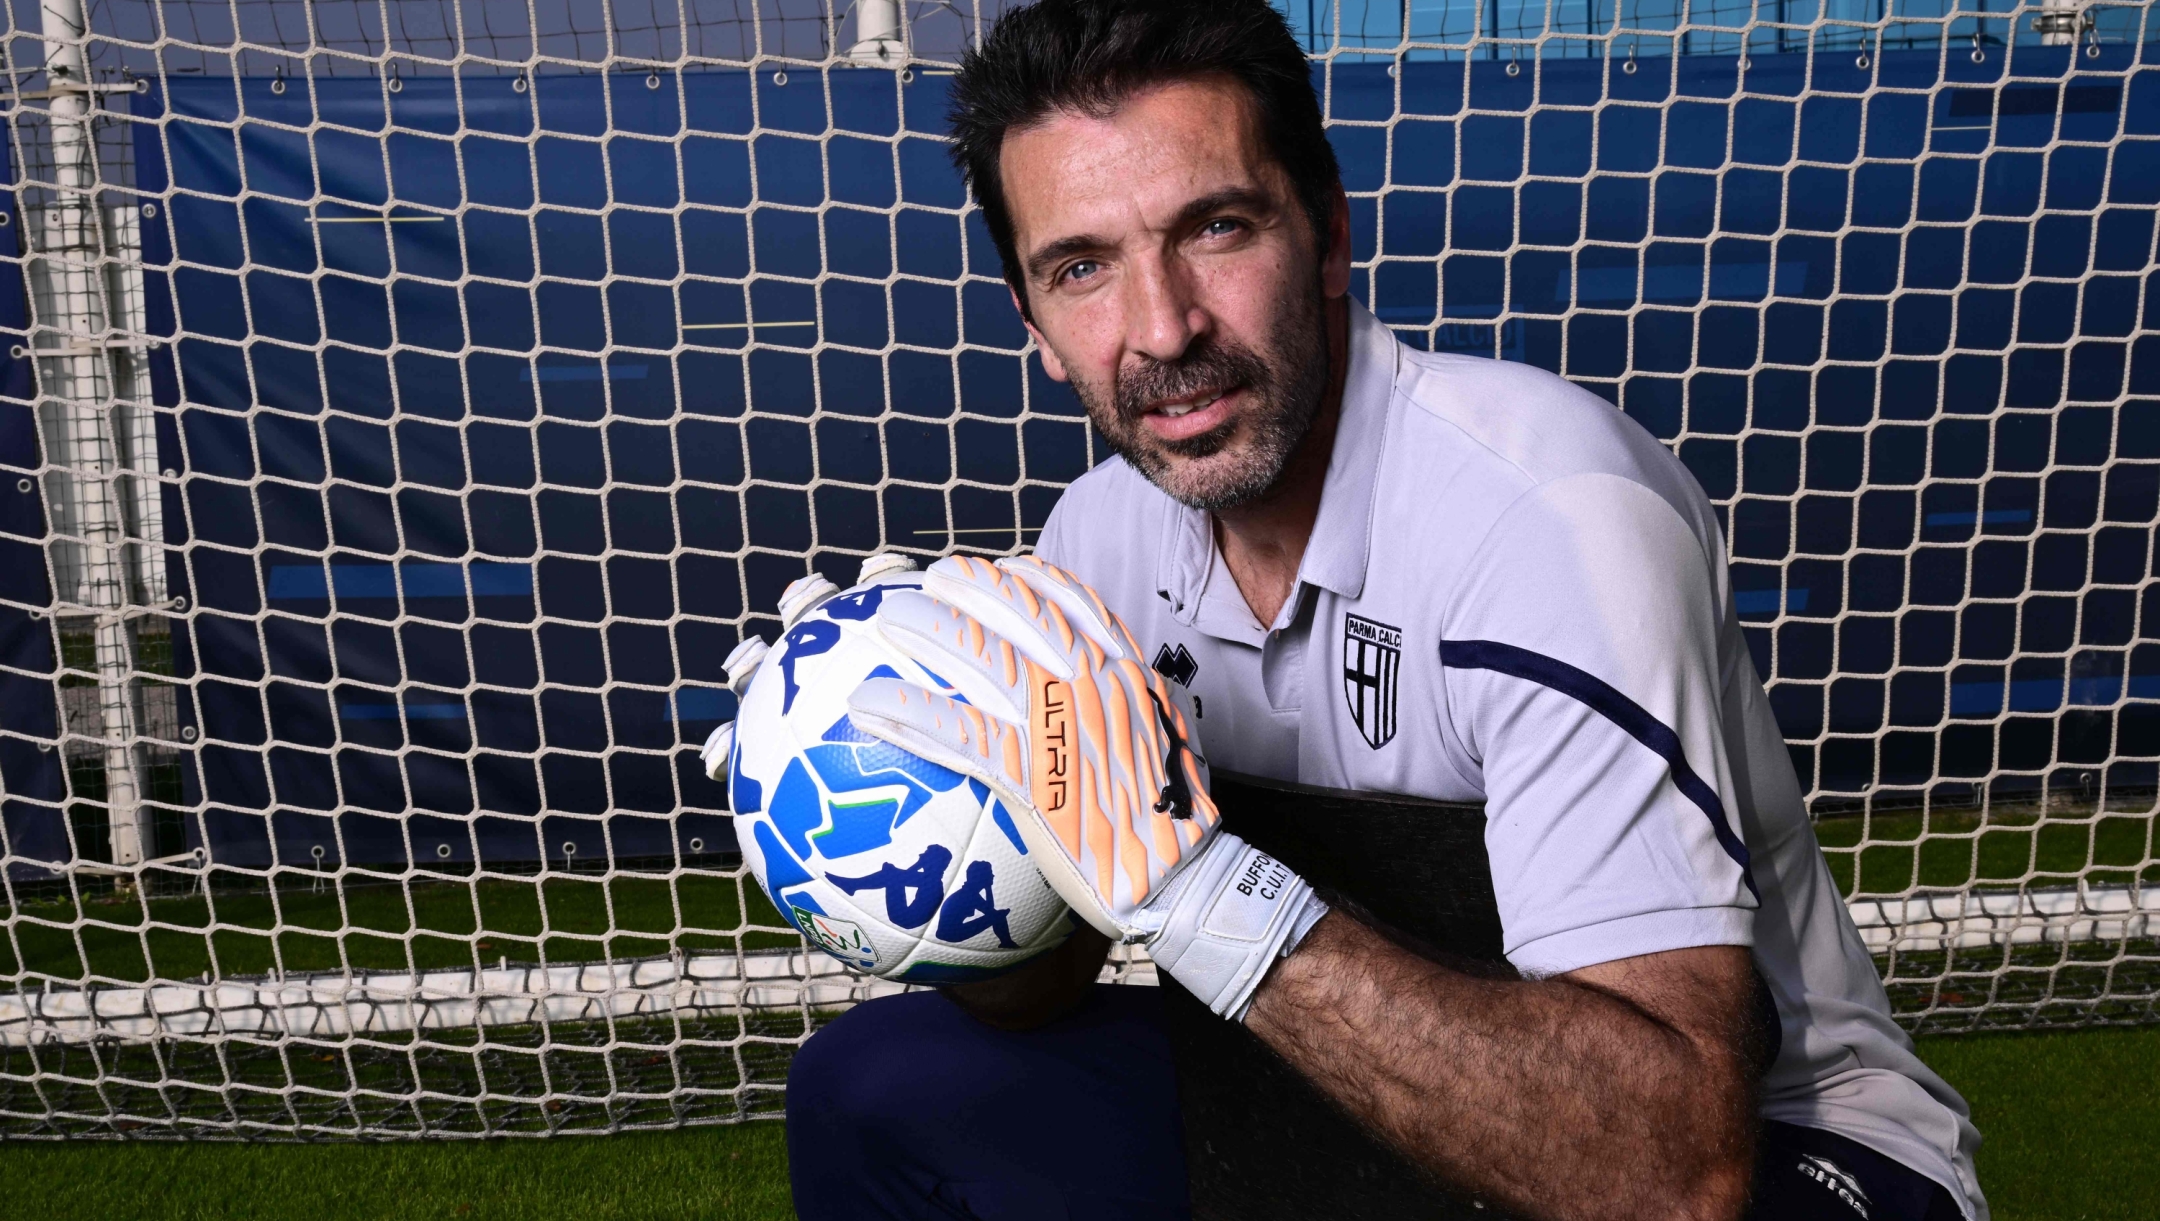 Gianluigi Buffon, known as Gigi, Italian footballer, goalkeeper and captain of Parma Football Club, former 2006 World Champion and vice-champion of Europe in 2012 with the Italian National Team, is pictured during an interview at the Collecchio Sports Center, in Parma on October 27, 2022. (Photo by Miguel MEDINA / AFP)